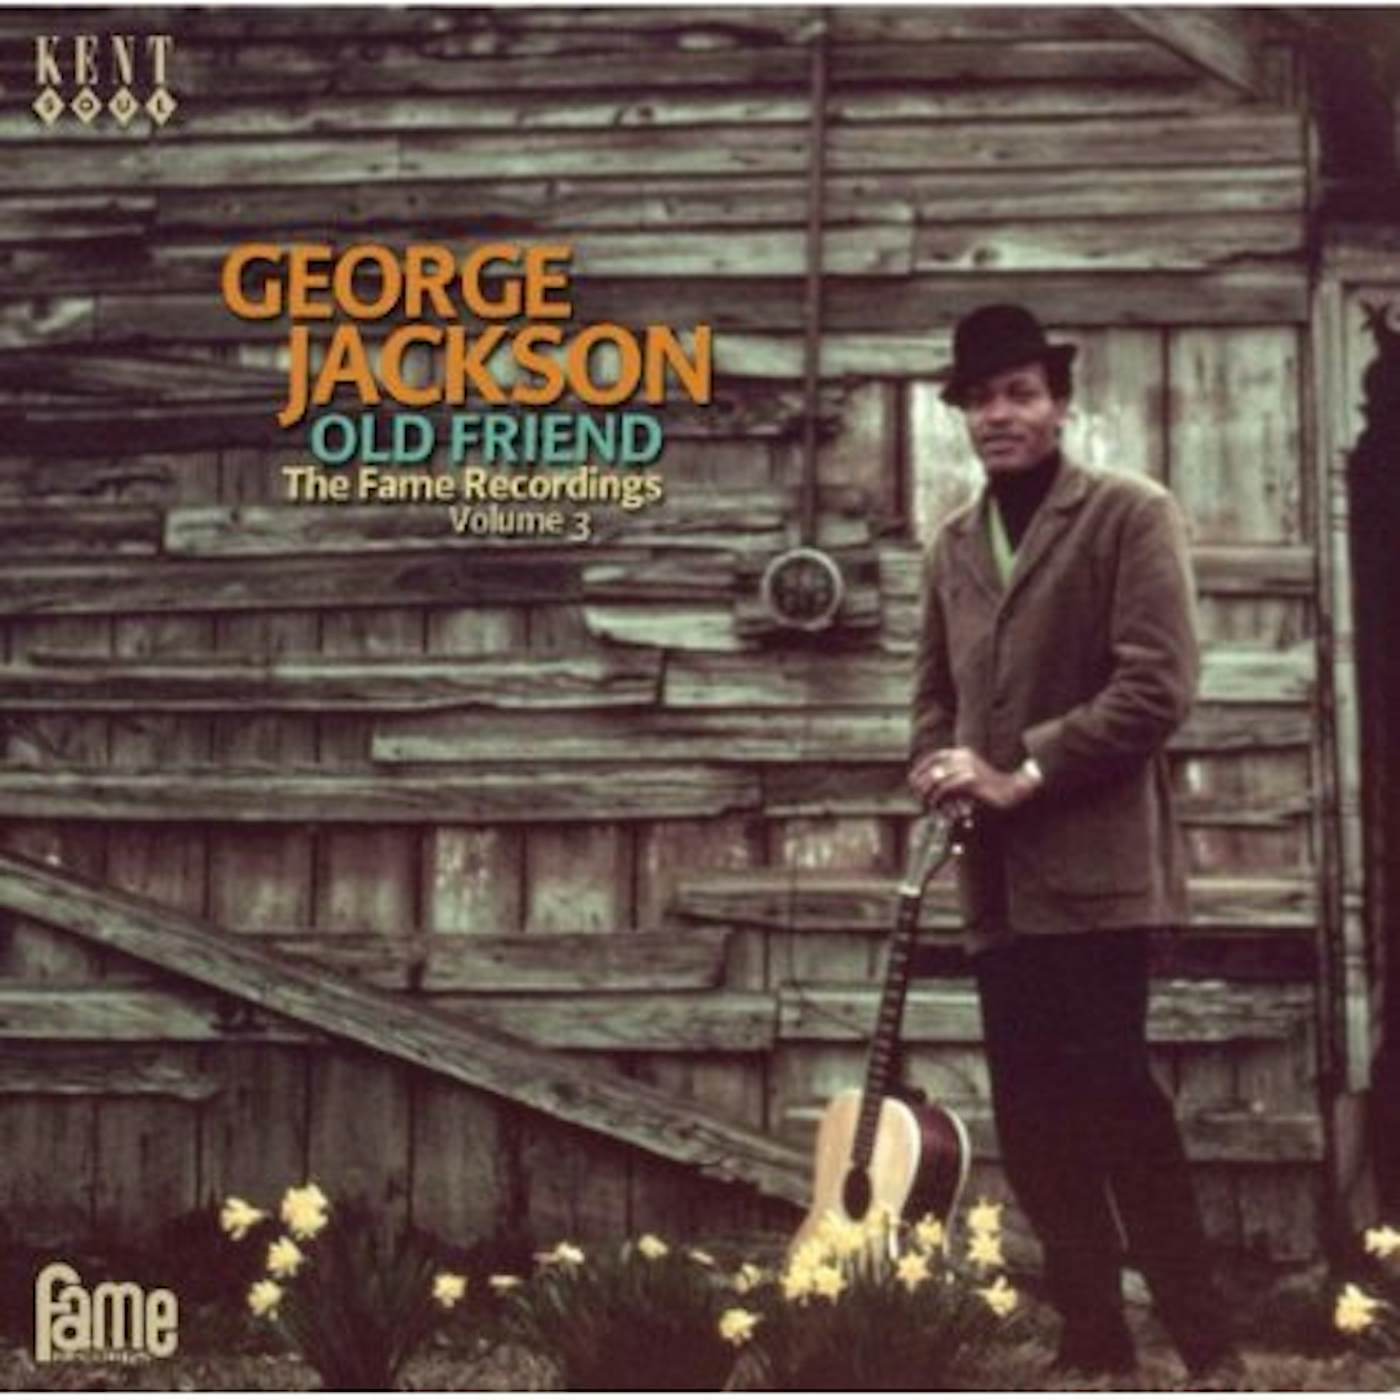 George Jackson OLD FRIEND: FAME RECORDINGS 3 CD